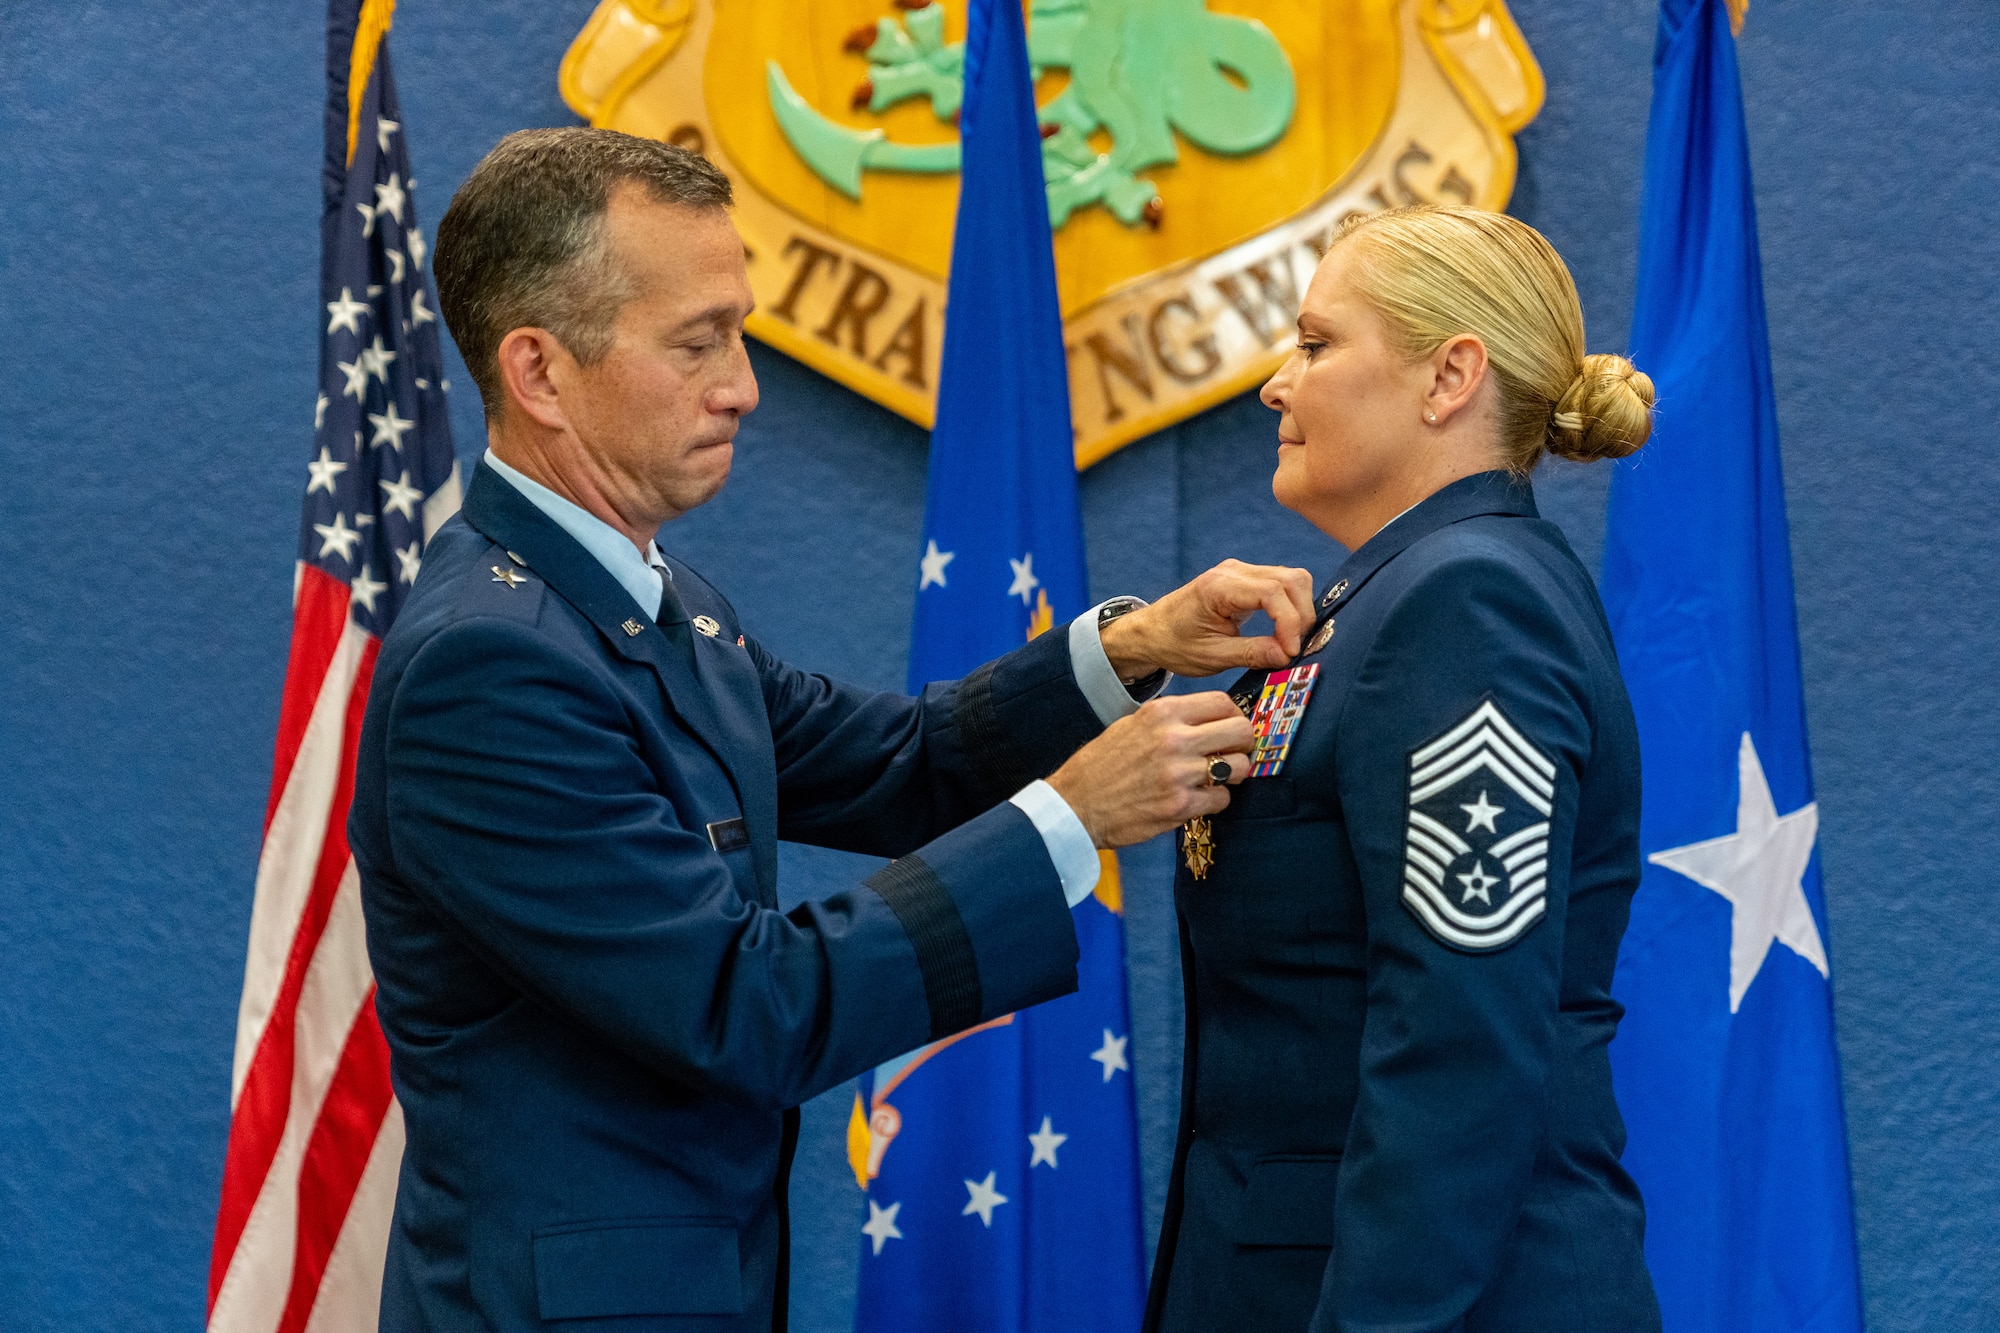 U.S. Air Force Brig. Gen. Houston Cantwell, Jeanne M. Holm Center for Oﬃcer Accessions and Citizen Development commander, pins the Legion of Merit medal onto Chief Master Sgt. Sarah Esparza, 81st Training Wing command chief master sergeant, during her retirement ceremony at Keesler Air Force Base, Mississippi, June 1, 2023.